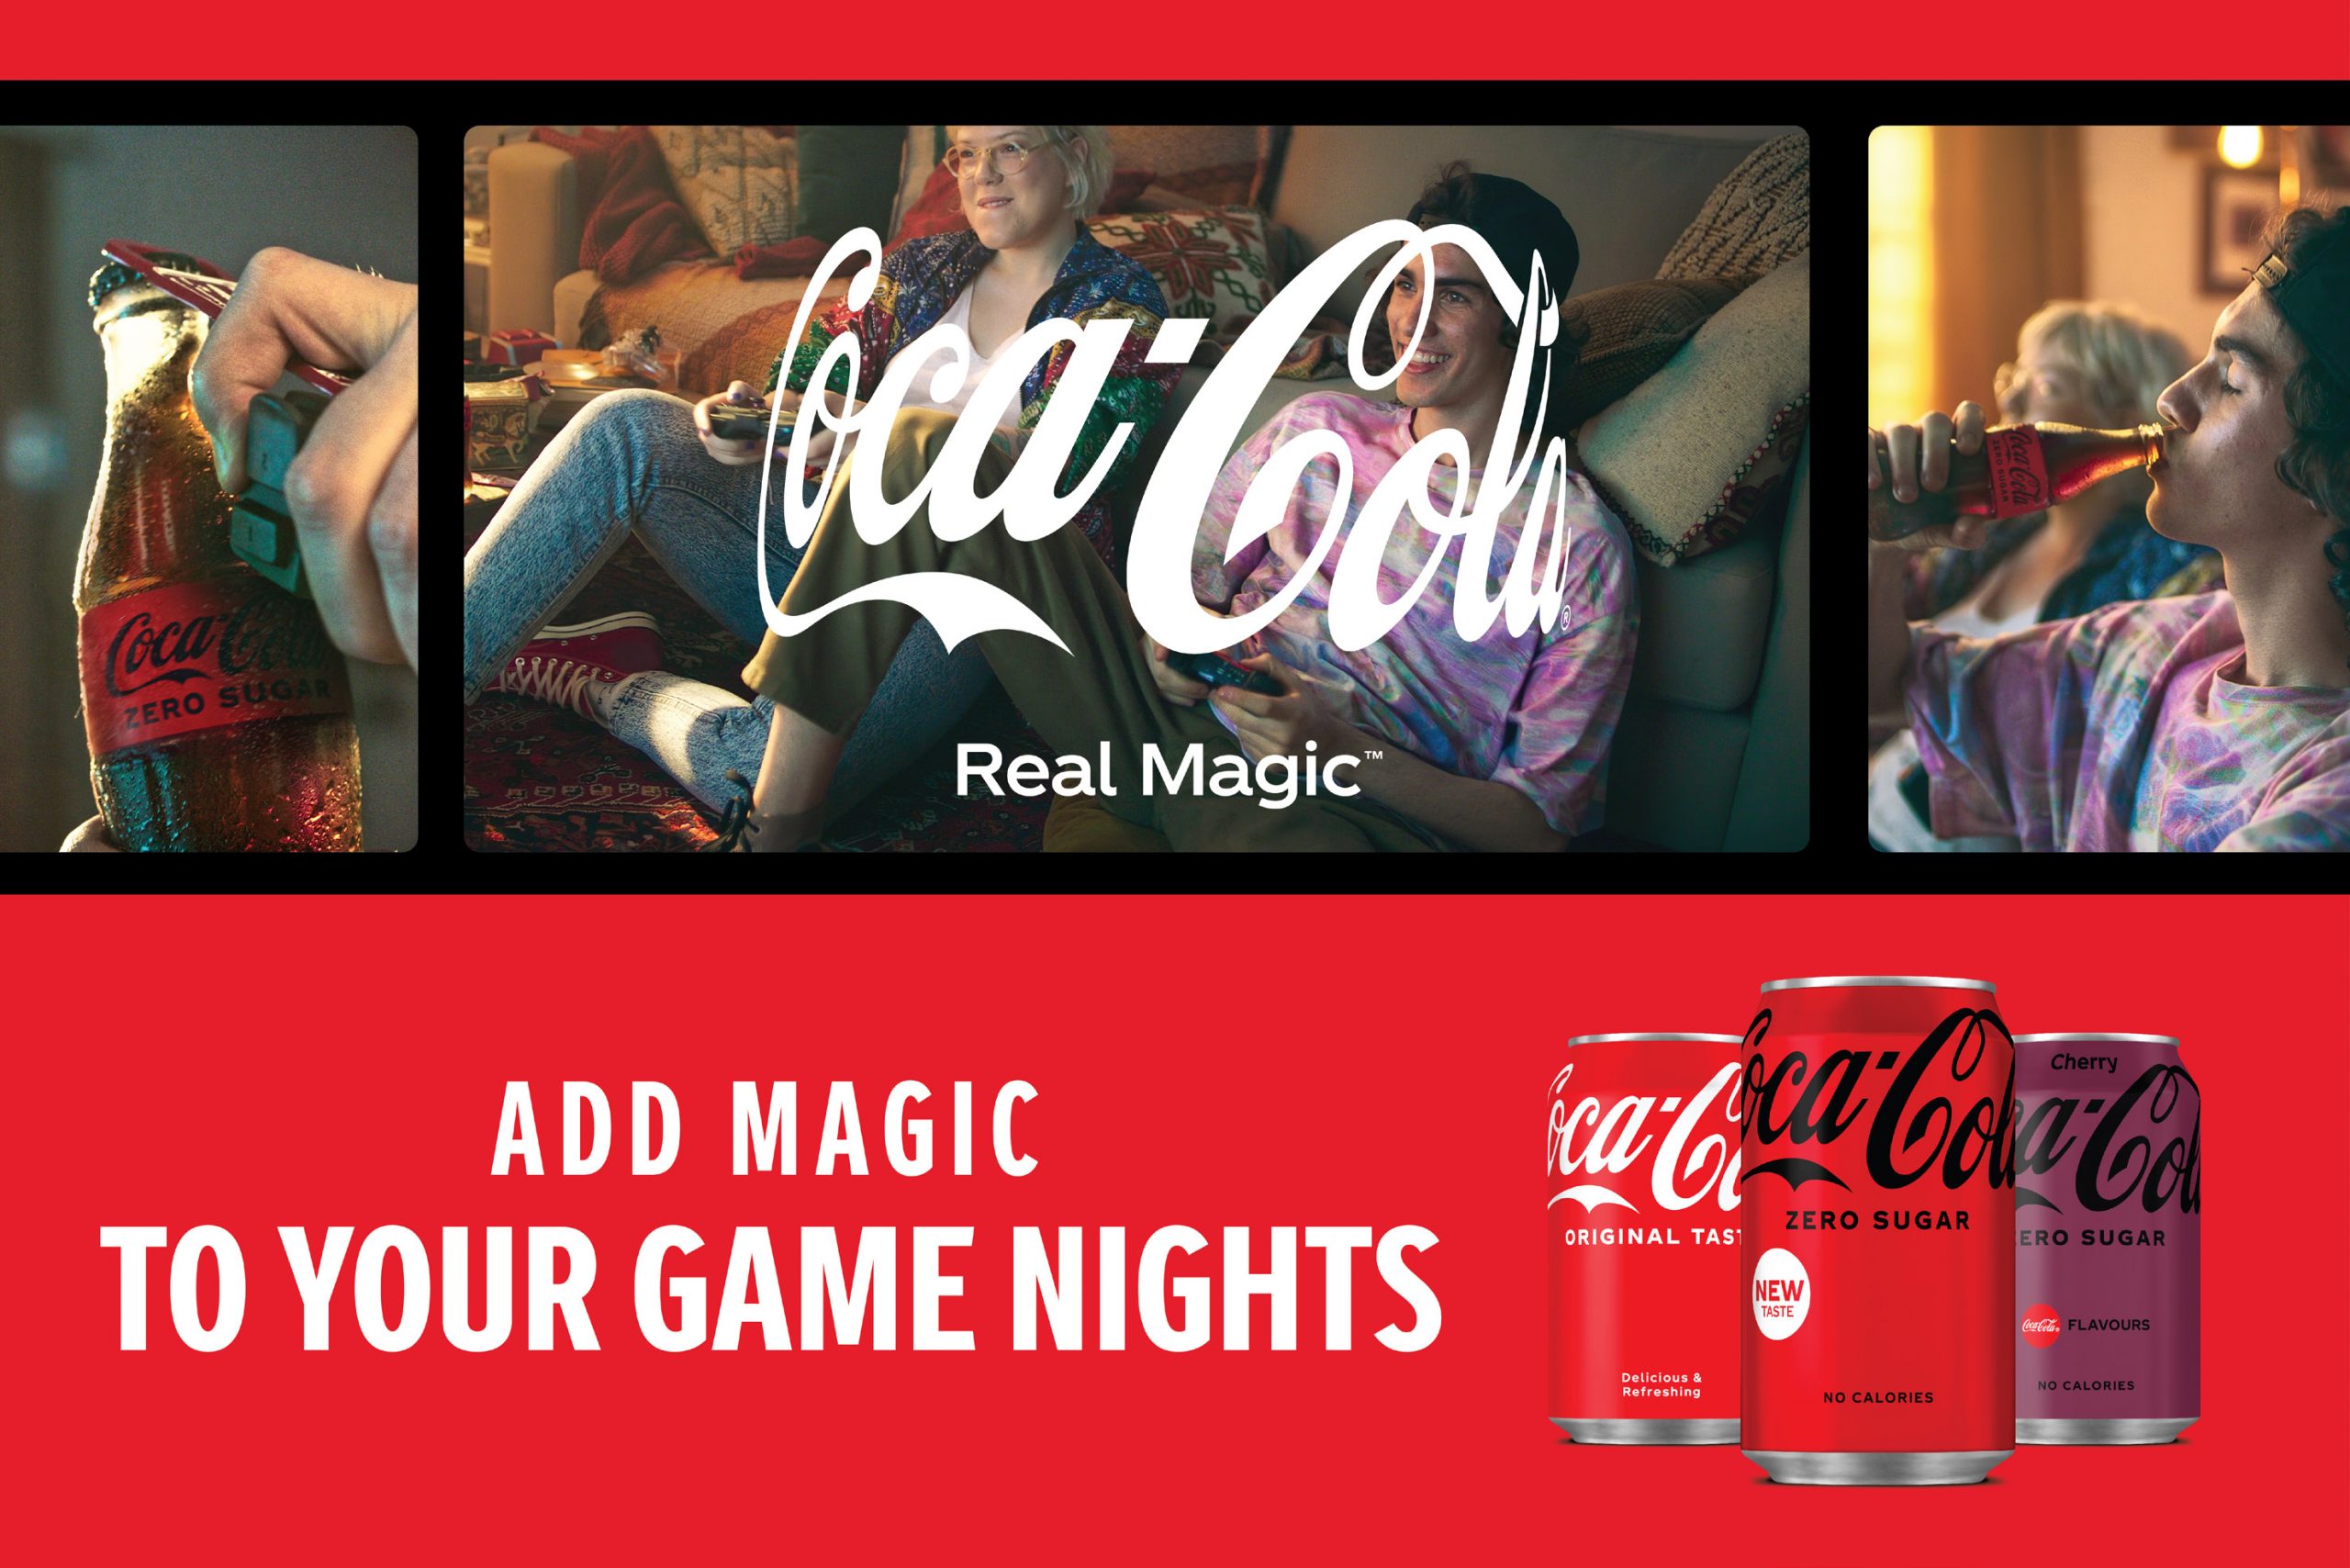 Coca-Cola Zero Sugar on-pack giveaway gaming promotional